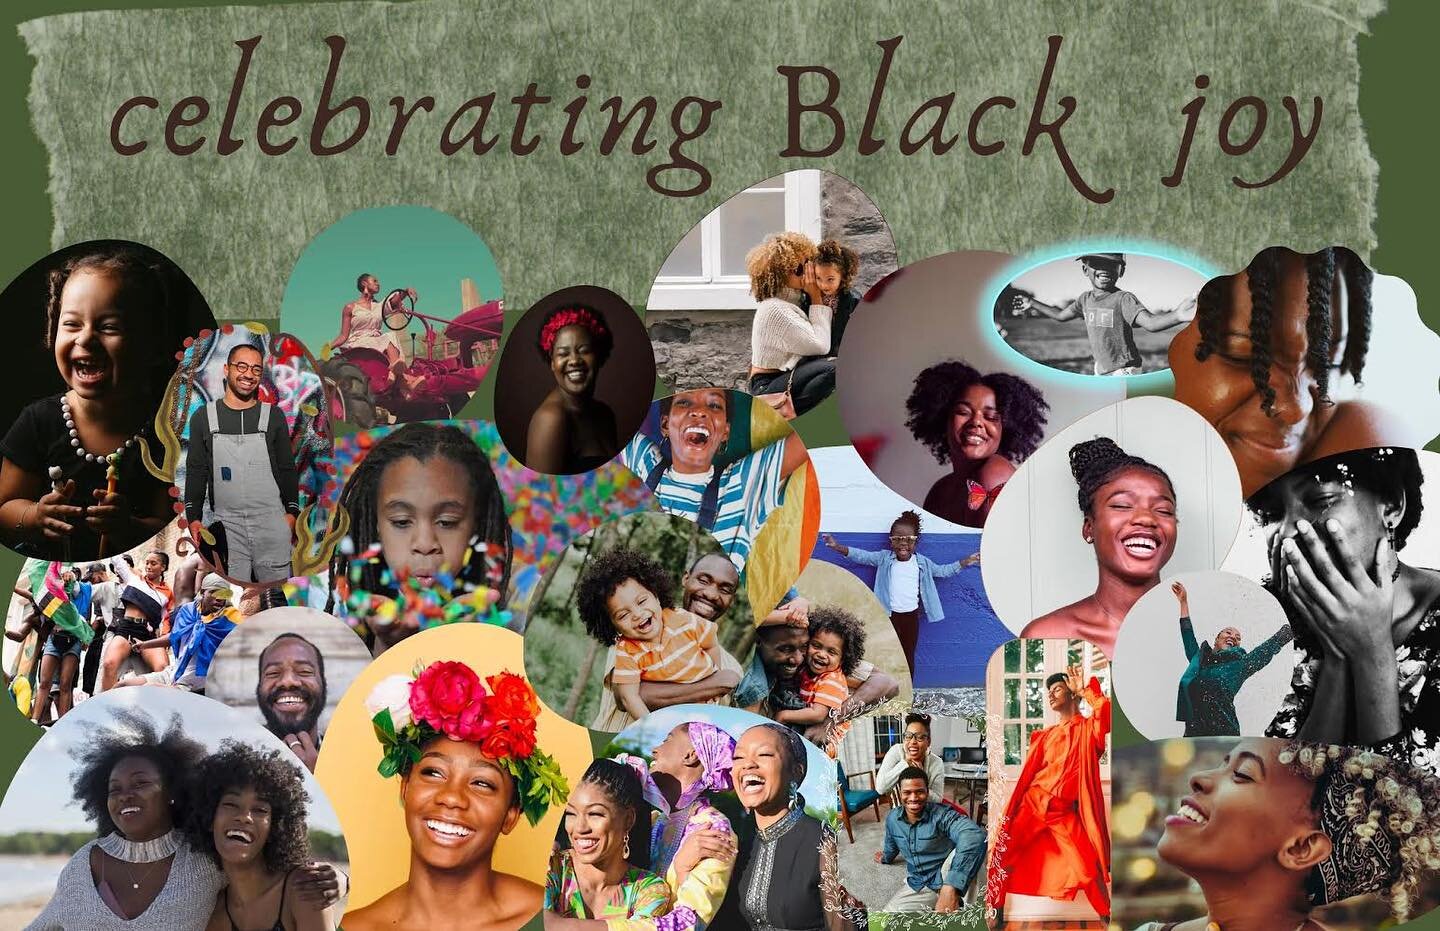 &ldquo;Black joy is the heartbeat and pulse of our survival, our resilience, our perseverance, our health and wellbeing.&rdquo; - Anita Dashiell-Sparks